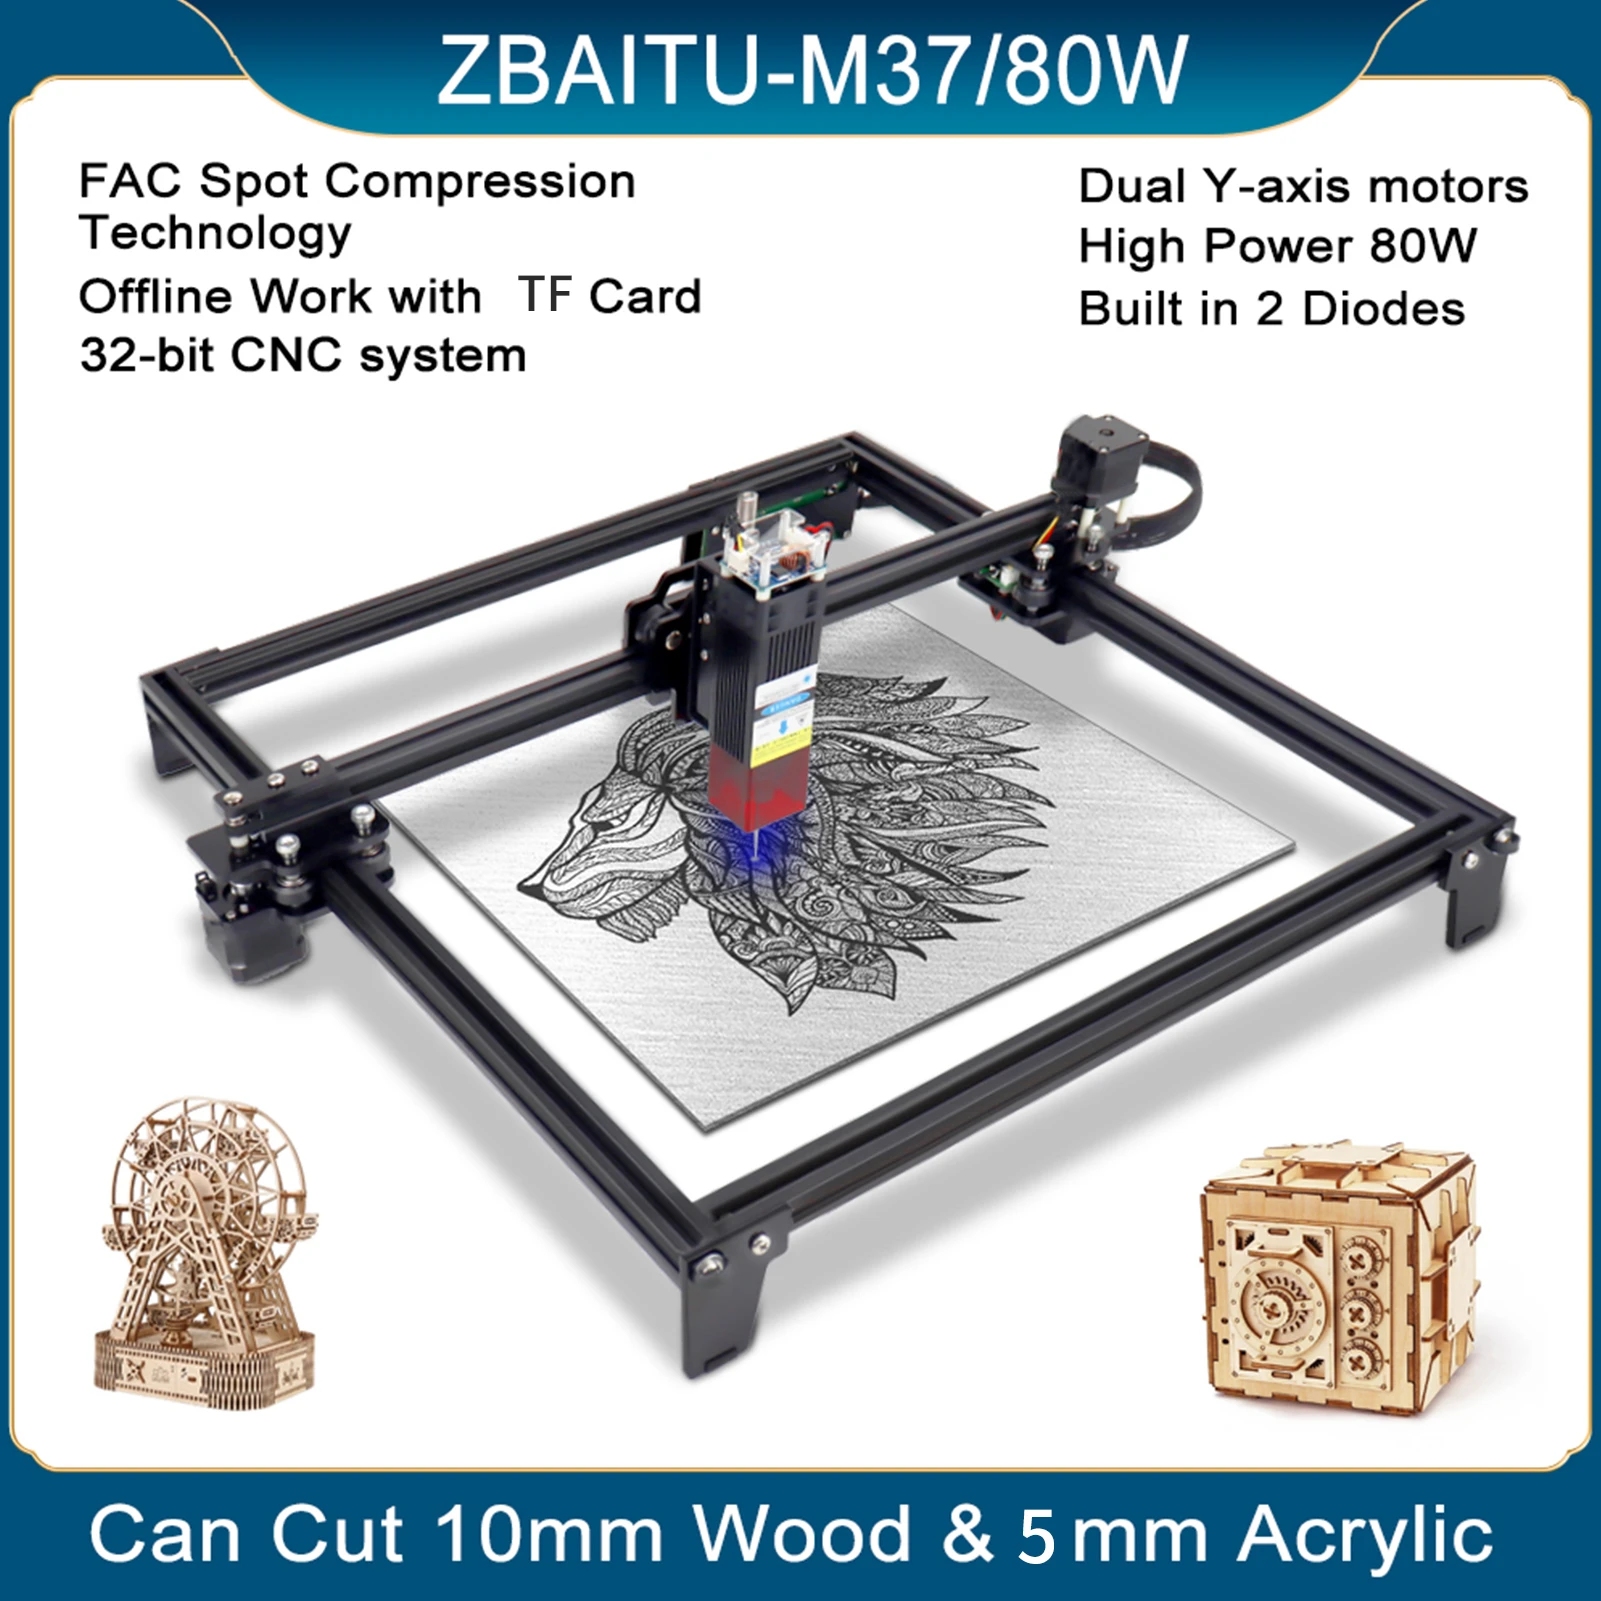 3d printers for sale 80W Laser Engraver 37x37cm Size Ultra-thin 0.08mm Fixed-focus Desktop DIY Full-Metal Engraving Cutting Machine Eye Protection best 3d printer